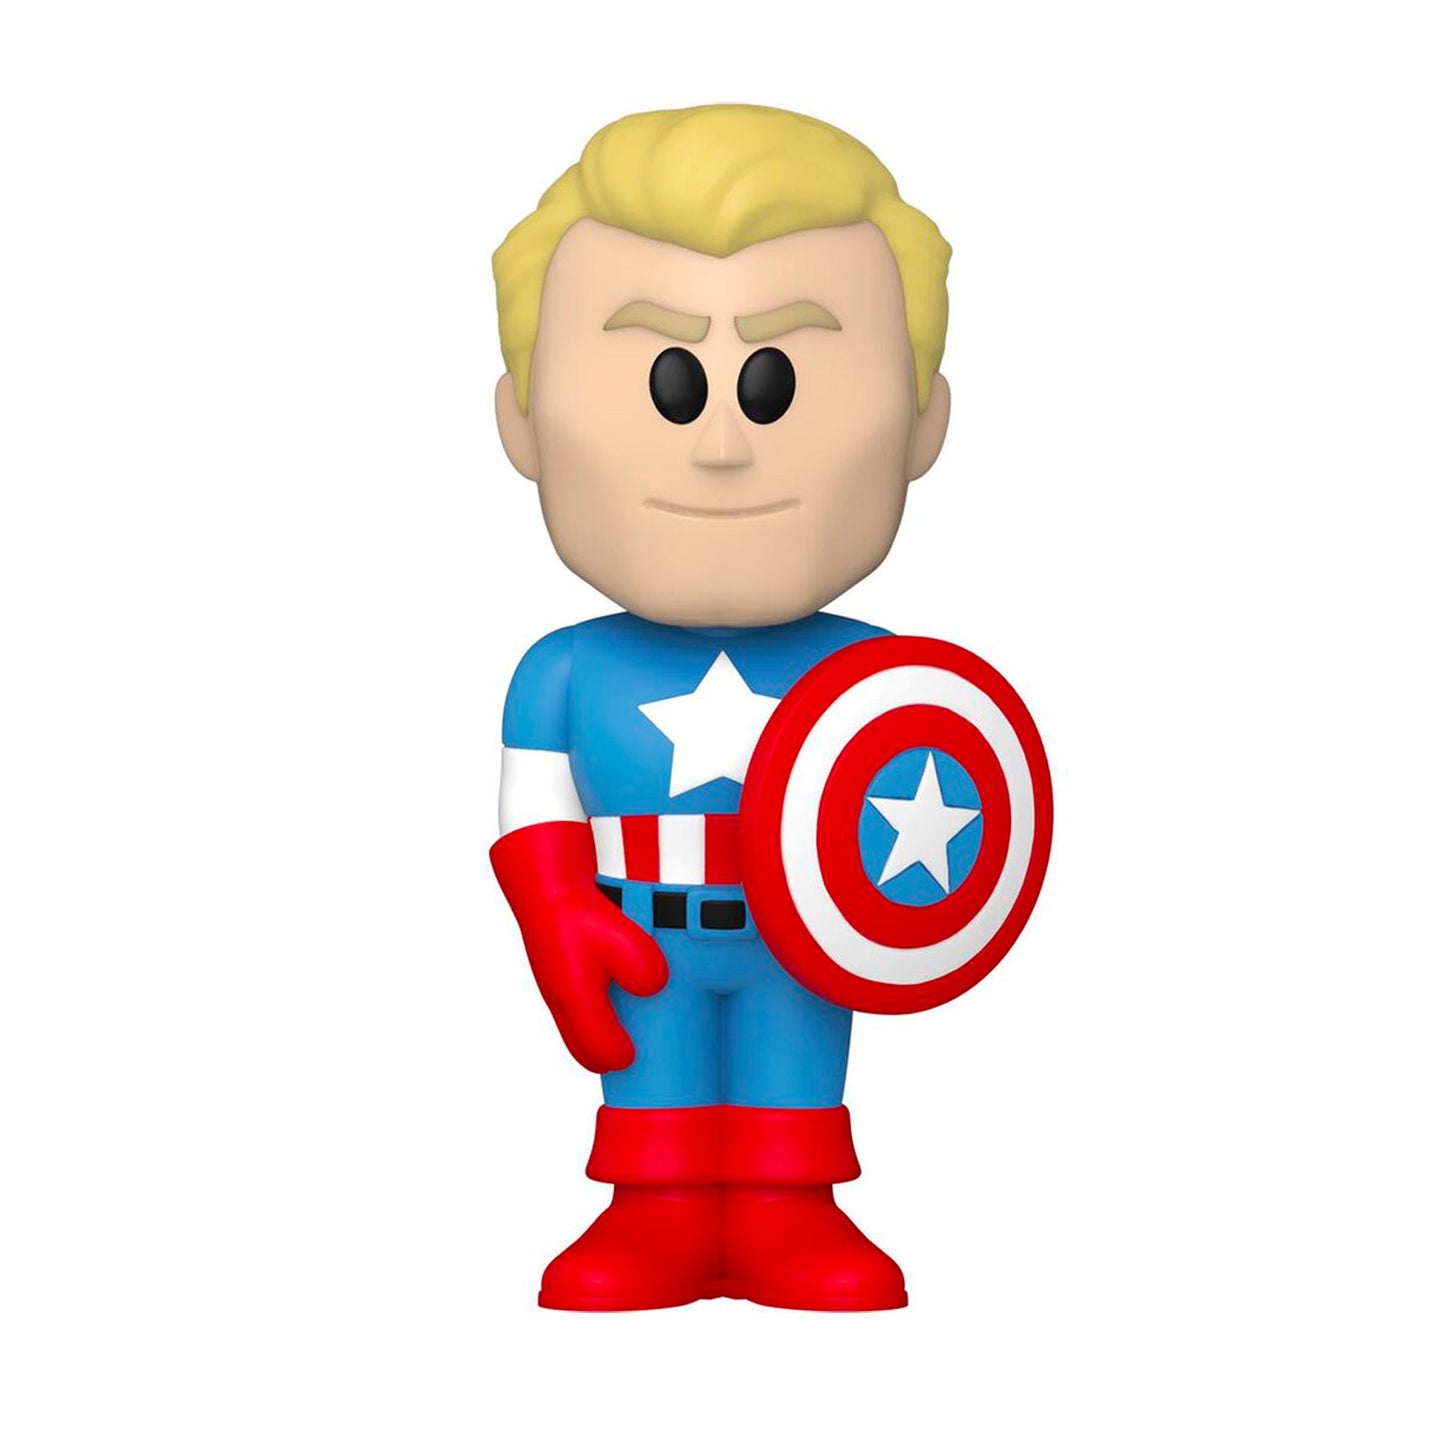 Funko Vinyl SODA: Captain America 14,000 Limited Edition (1 in 6 Chance at Chase)